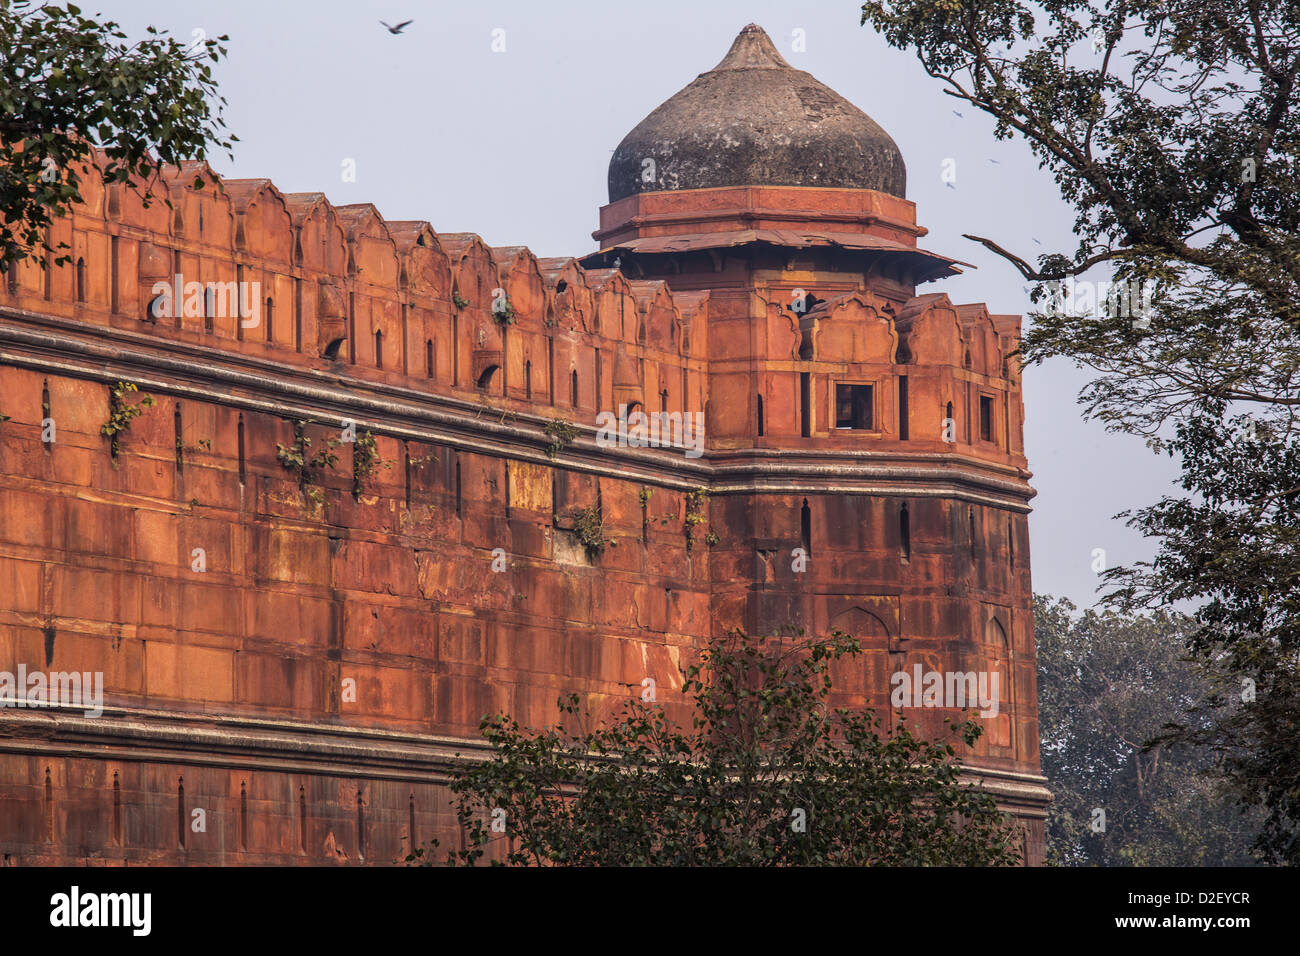 Lal Qila or Red Fort in Old Delhi, India Stock Photo